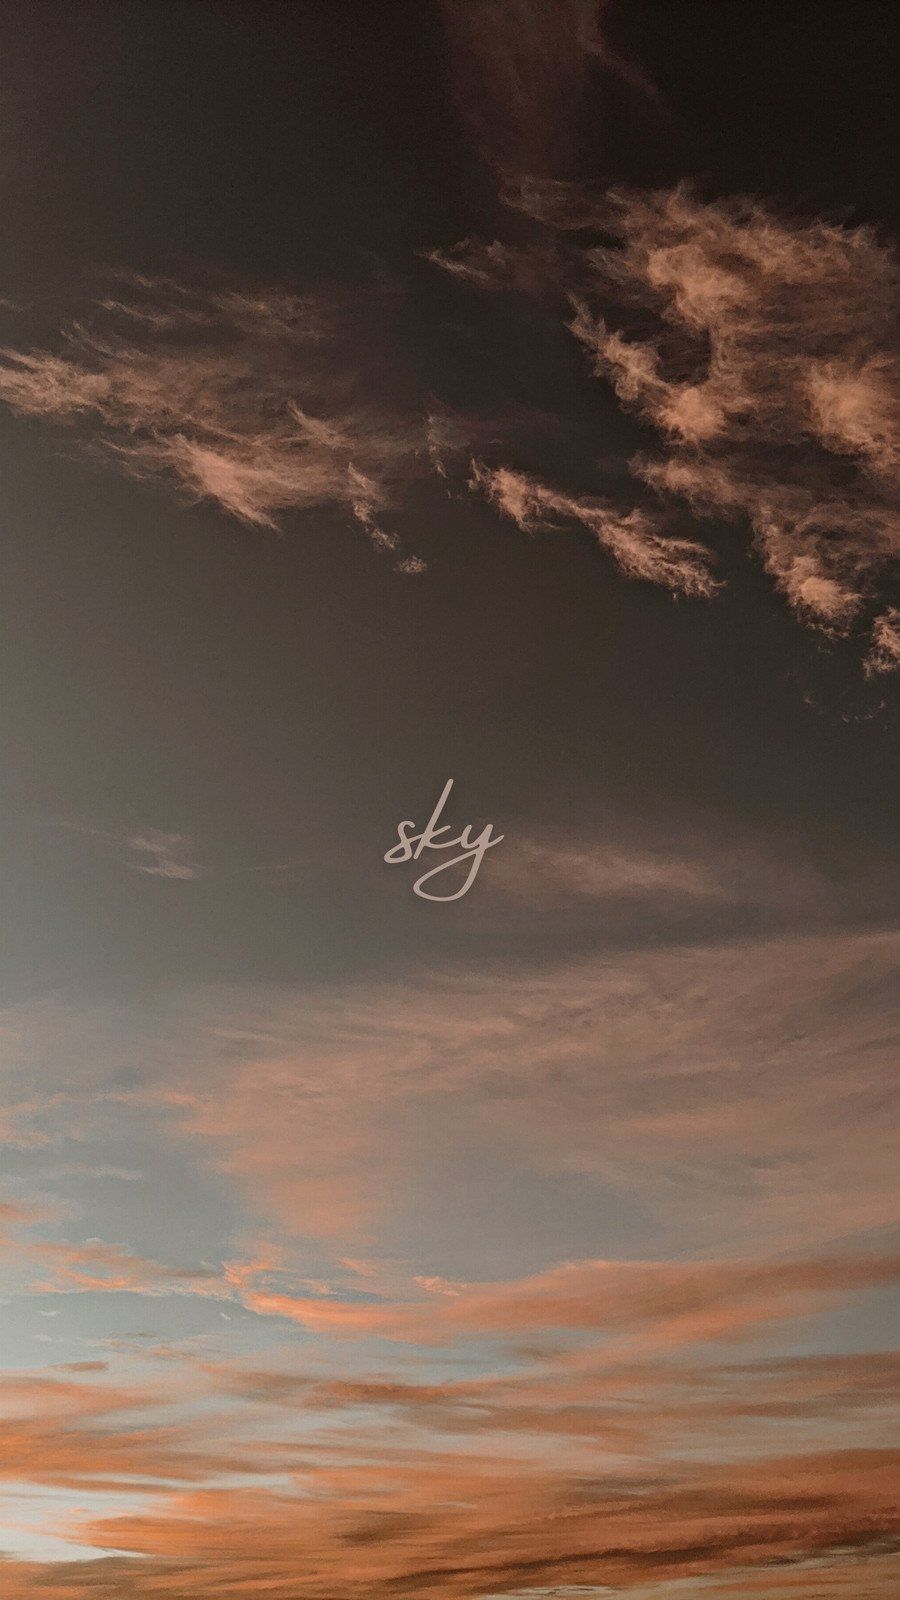 A plane flying over the clouds at sunset - Sky